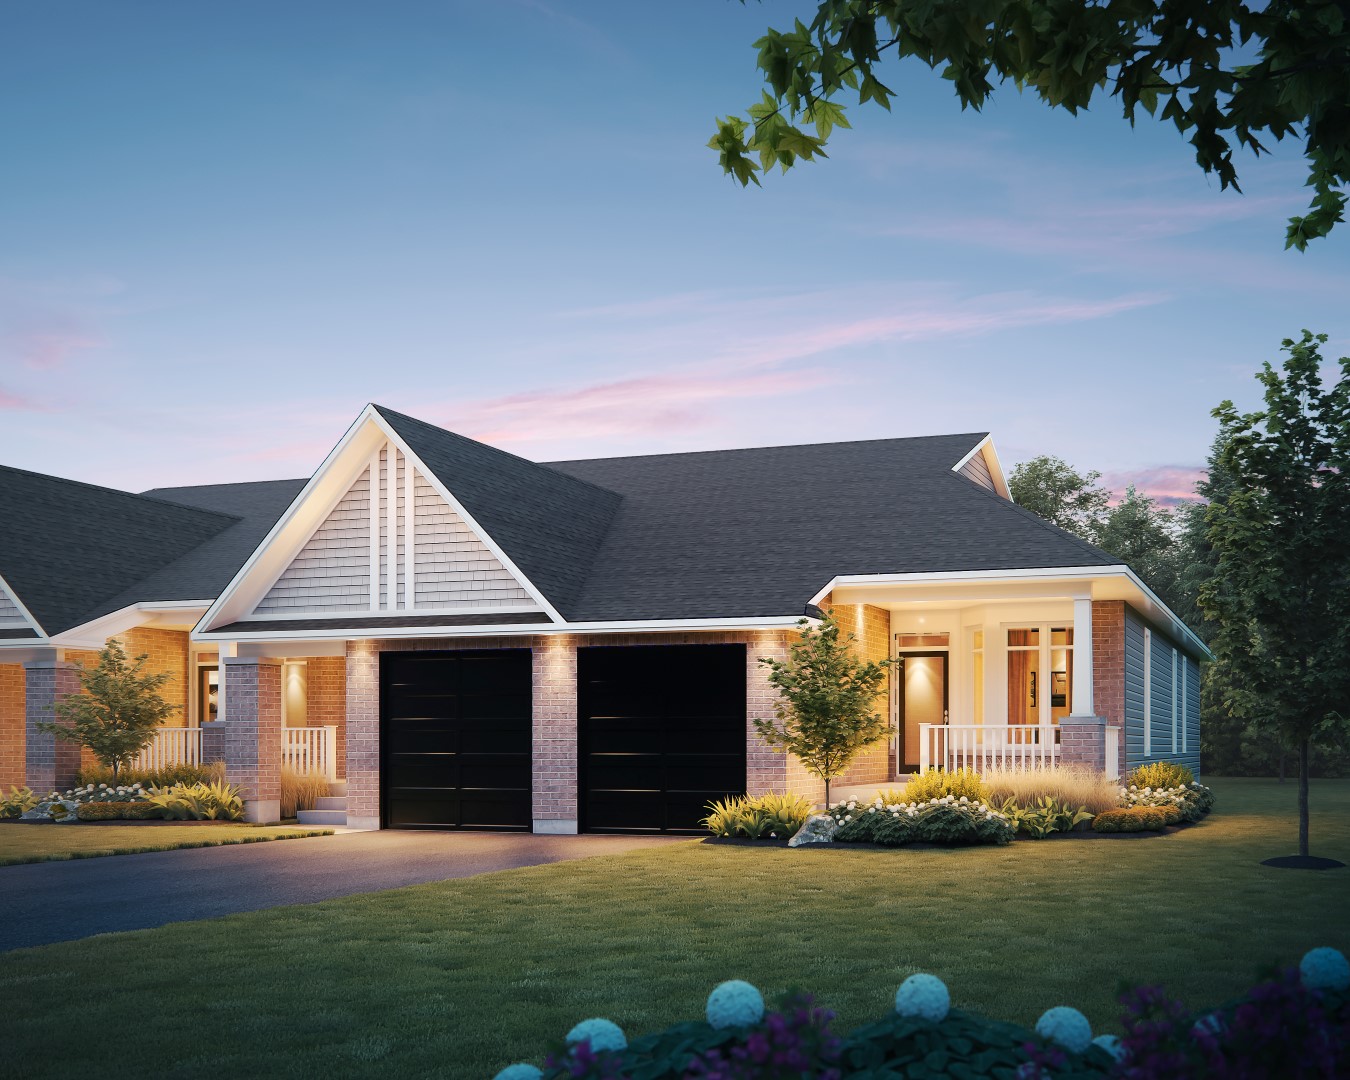 Swan (End) Bungalow Townhome Rendering